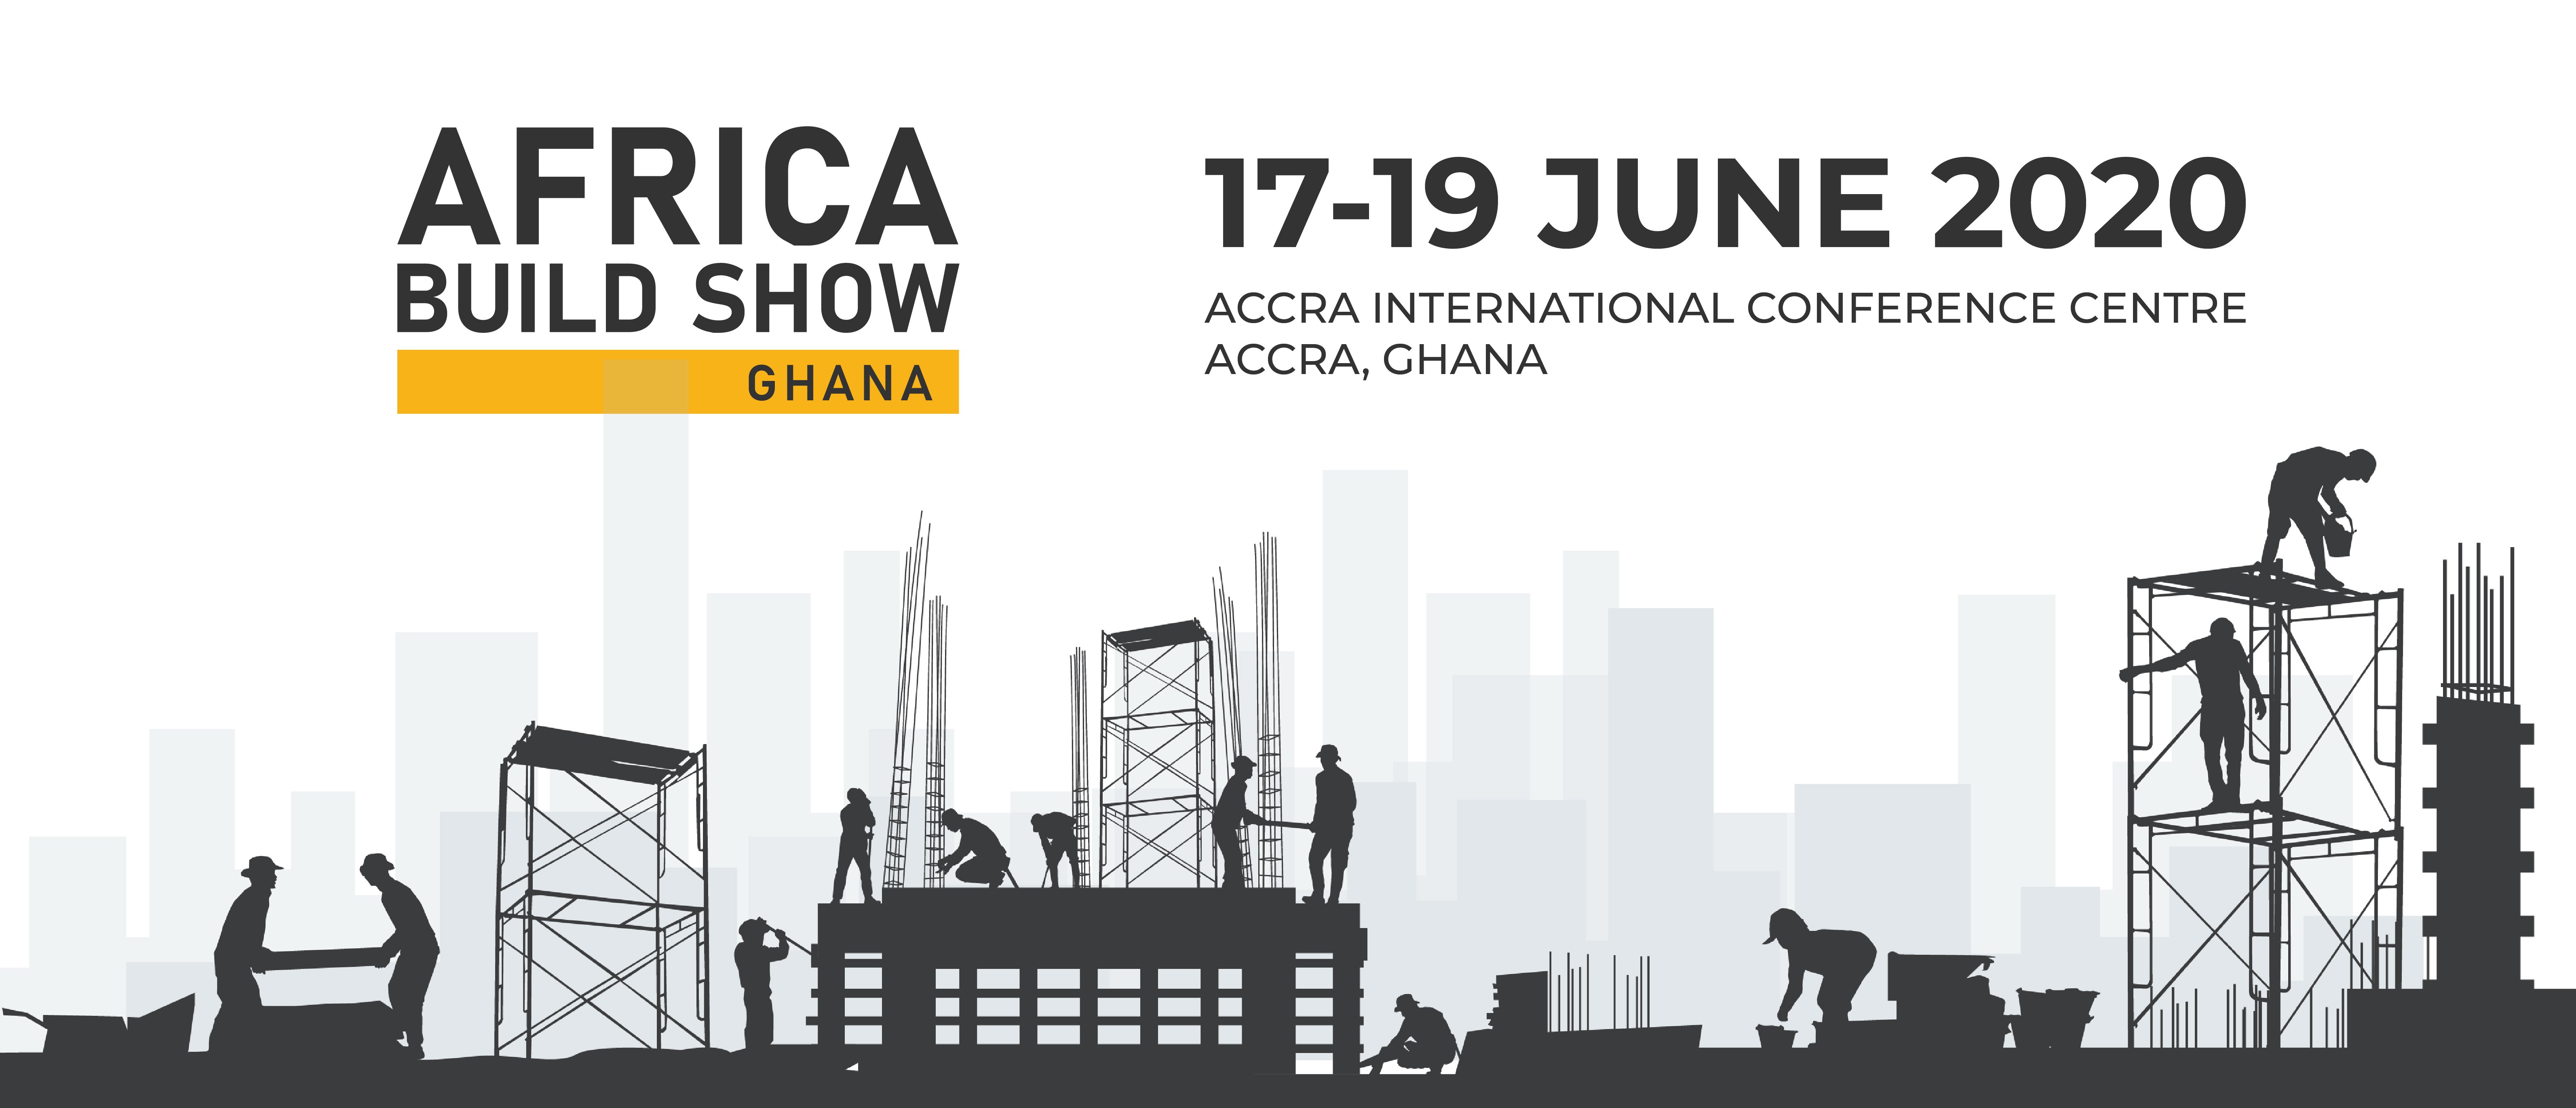 Africa Build Show